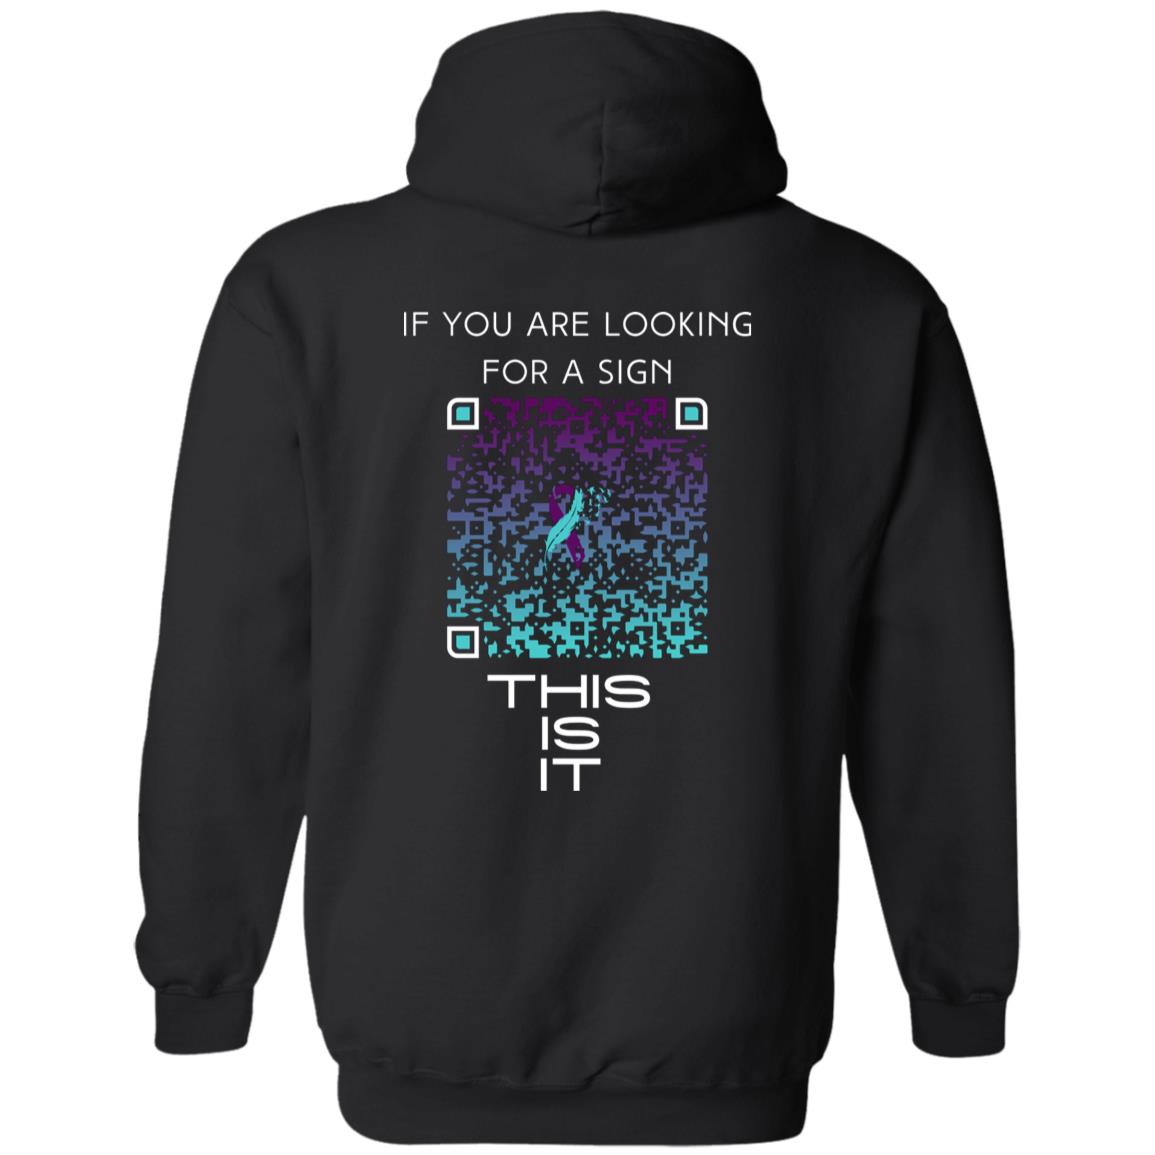 Sign of Strength Pullover Hoodie - HopeLinks QrClothes